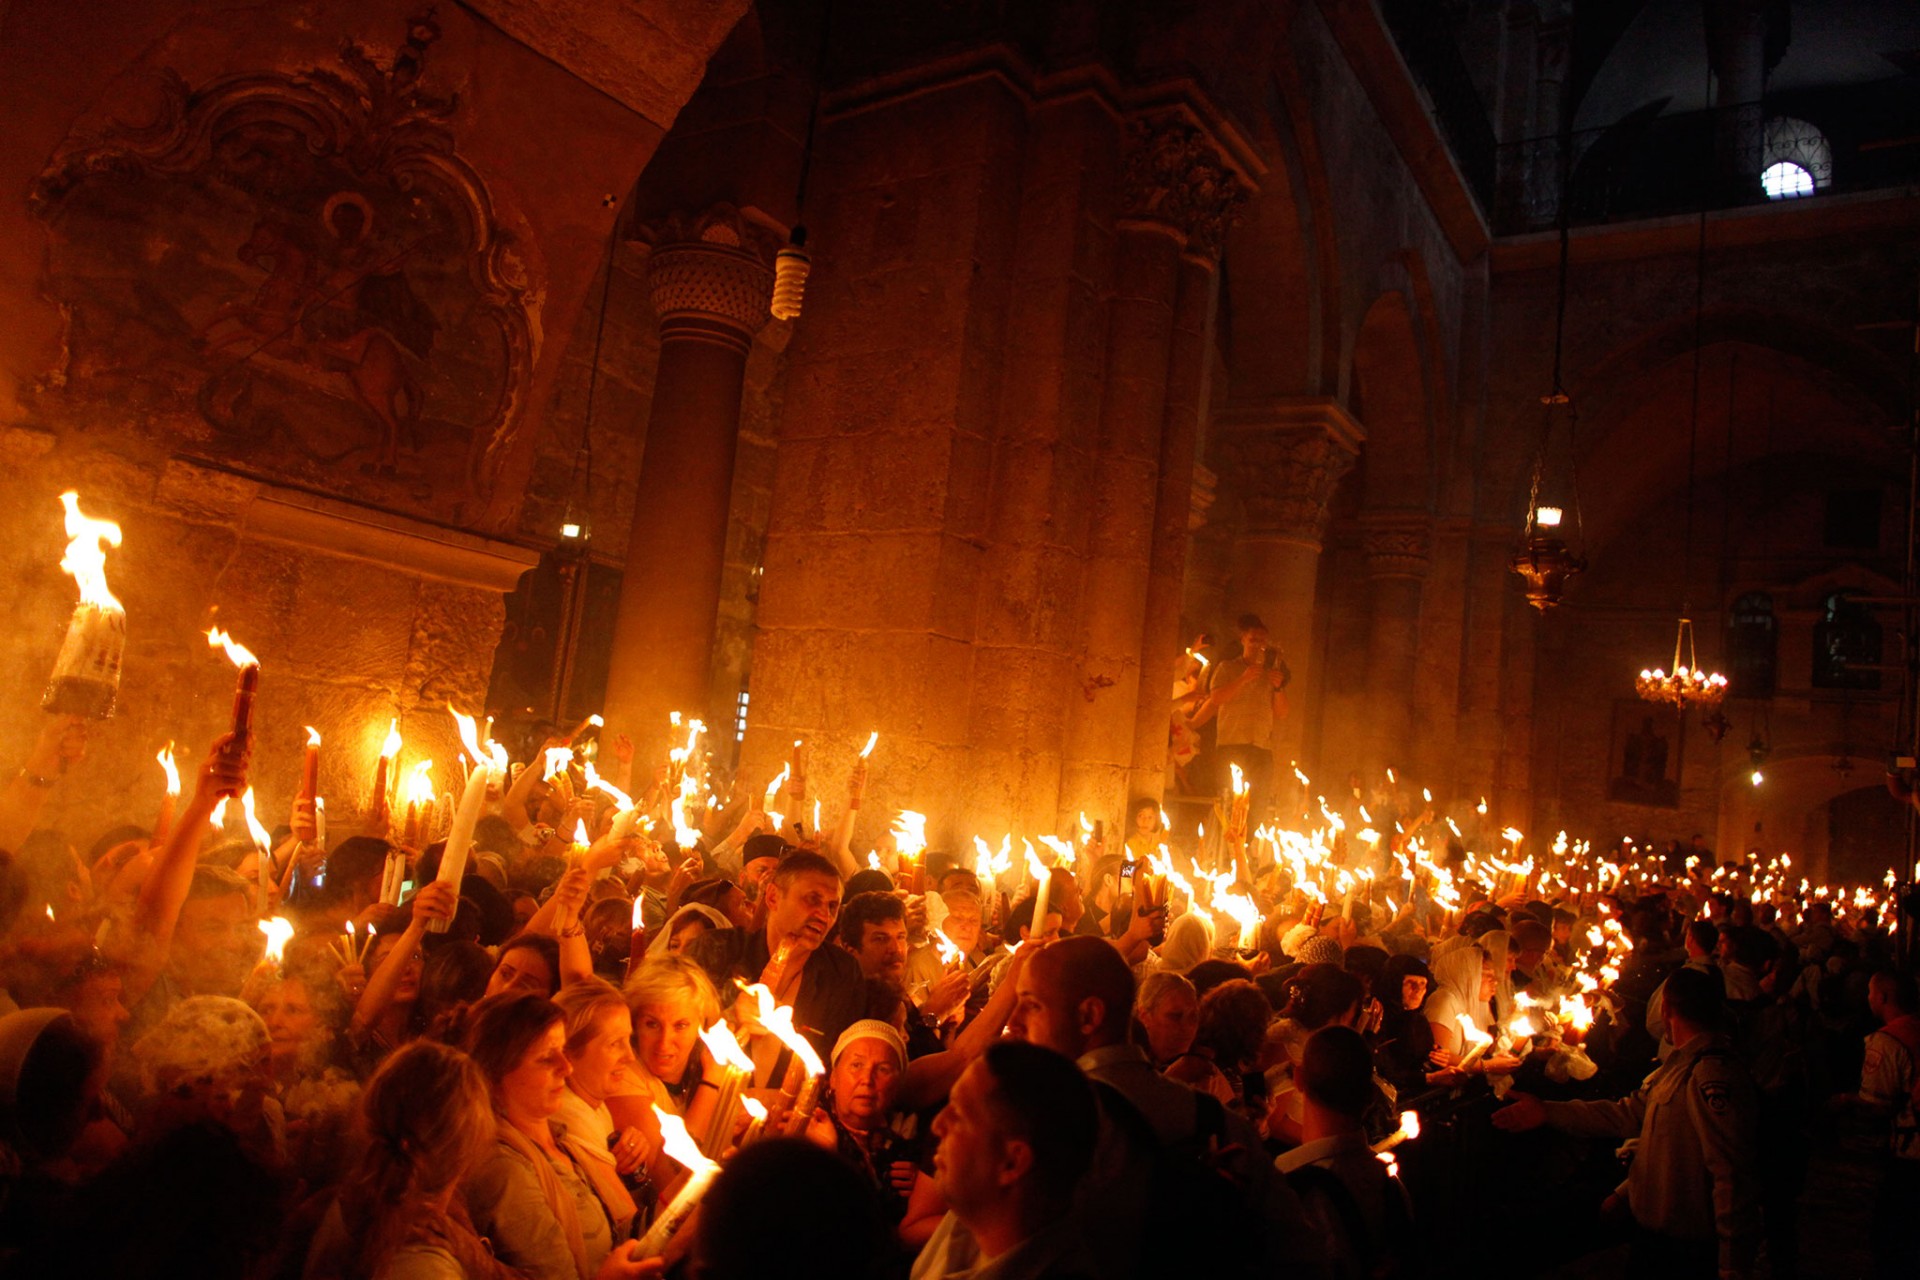 Holy Fire Ceremony at the Church of the Holy Sepulchre, Jerusalem 2013